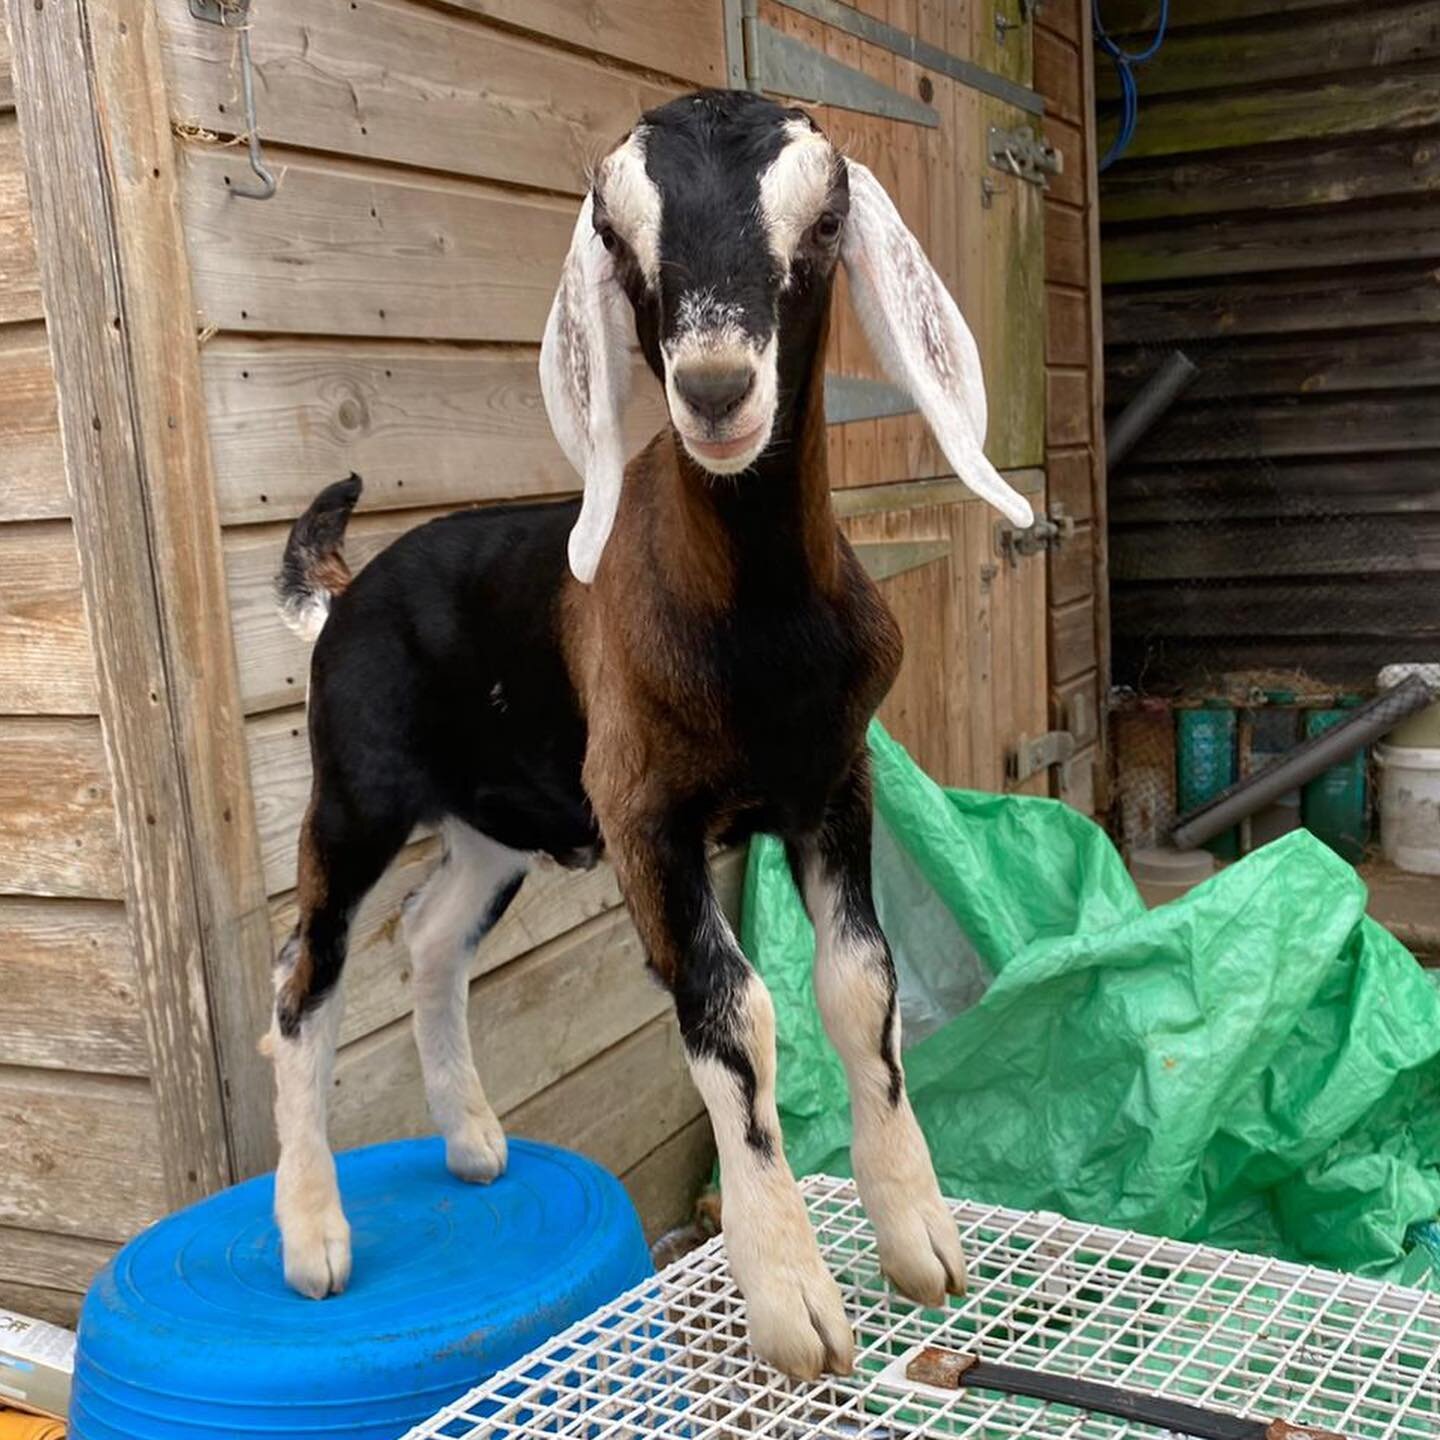 Excitement overload, cuteness overload!! Two new CFO&rsquo;s, chief furry officers soon to be running the show @riverside_farm_sussex meet Ralph and Ted, who will be joining us in a couple of months&hellip; #news #camping #goats #goat #caravan #campe